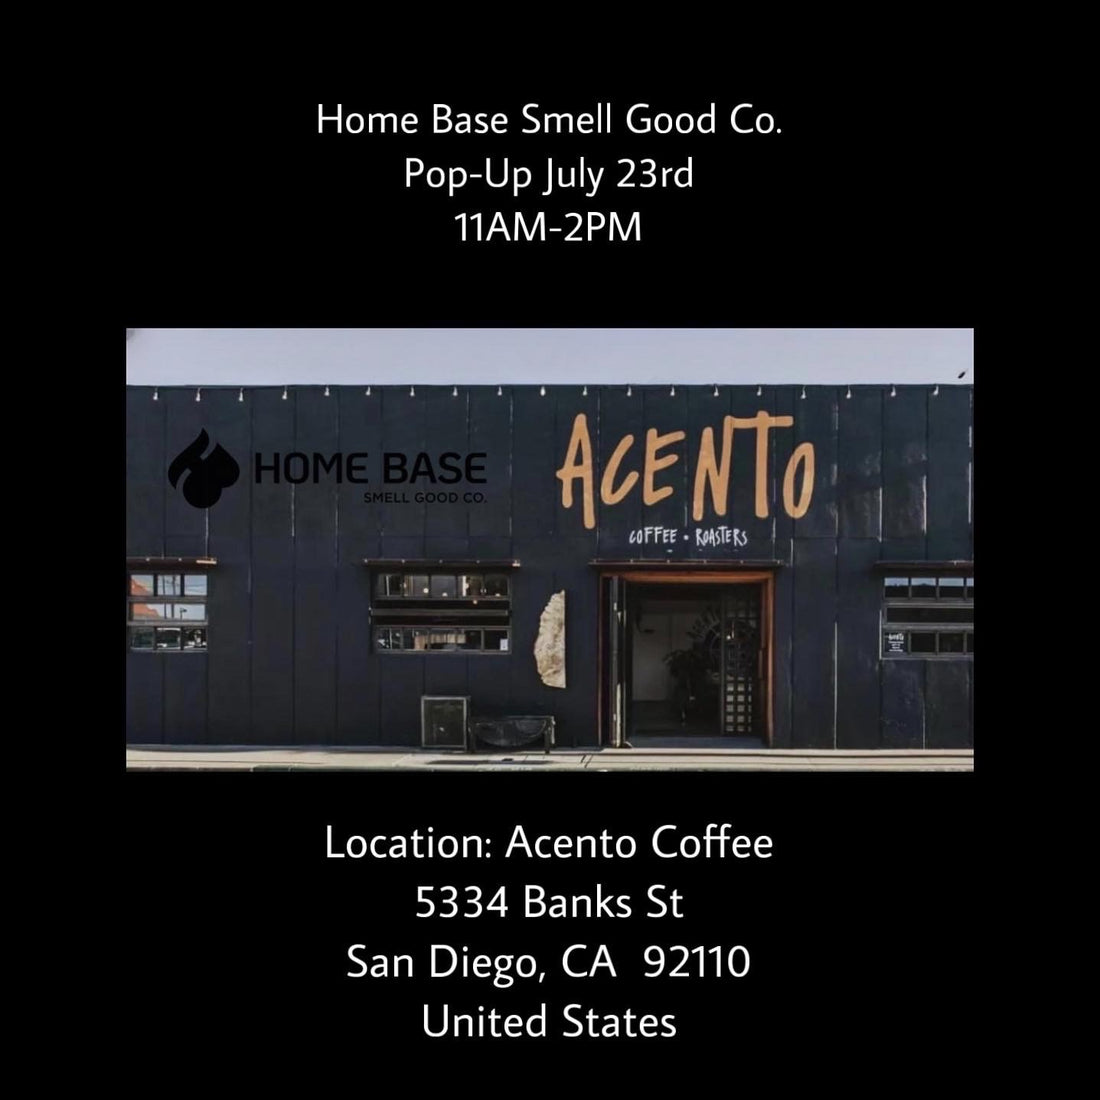 July Pop-Up at Acento Coffee